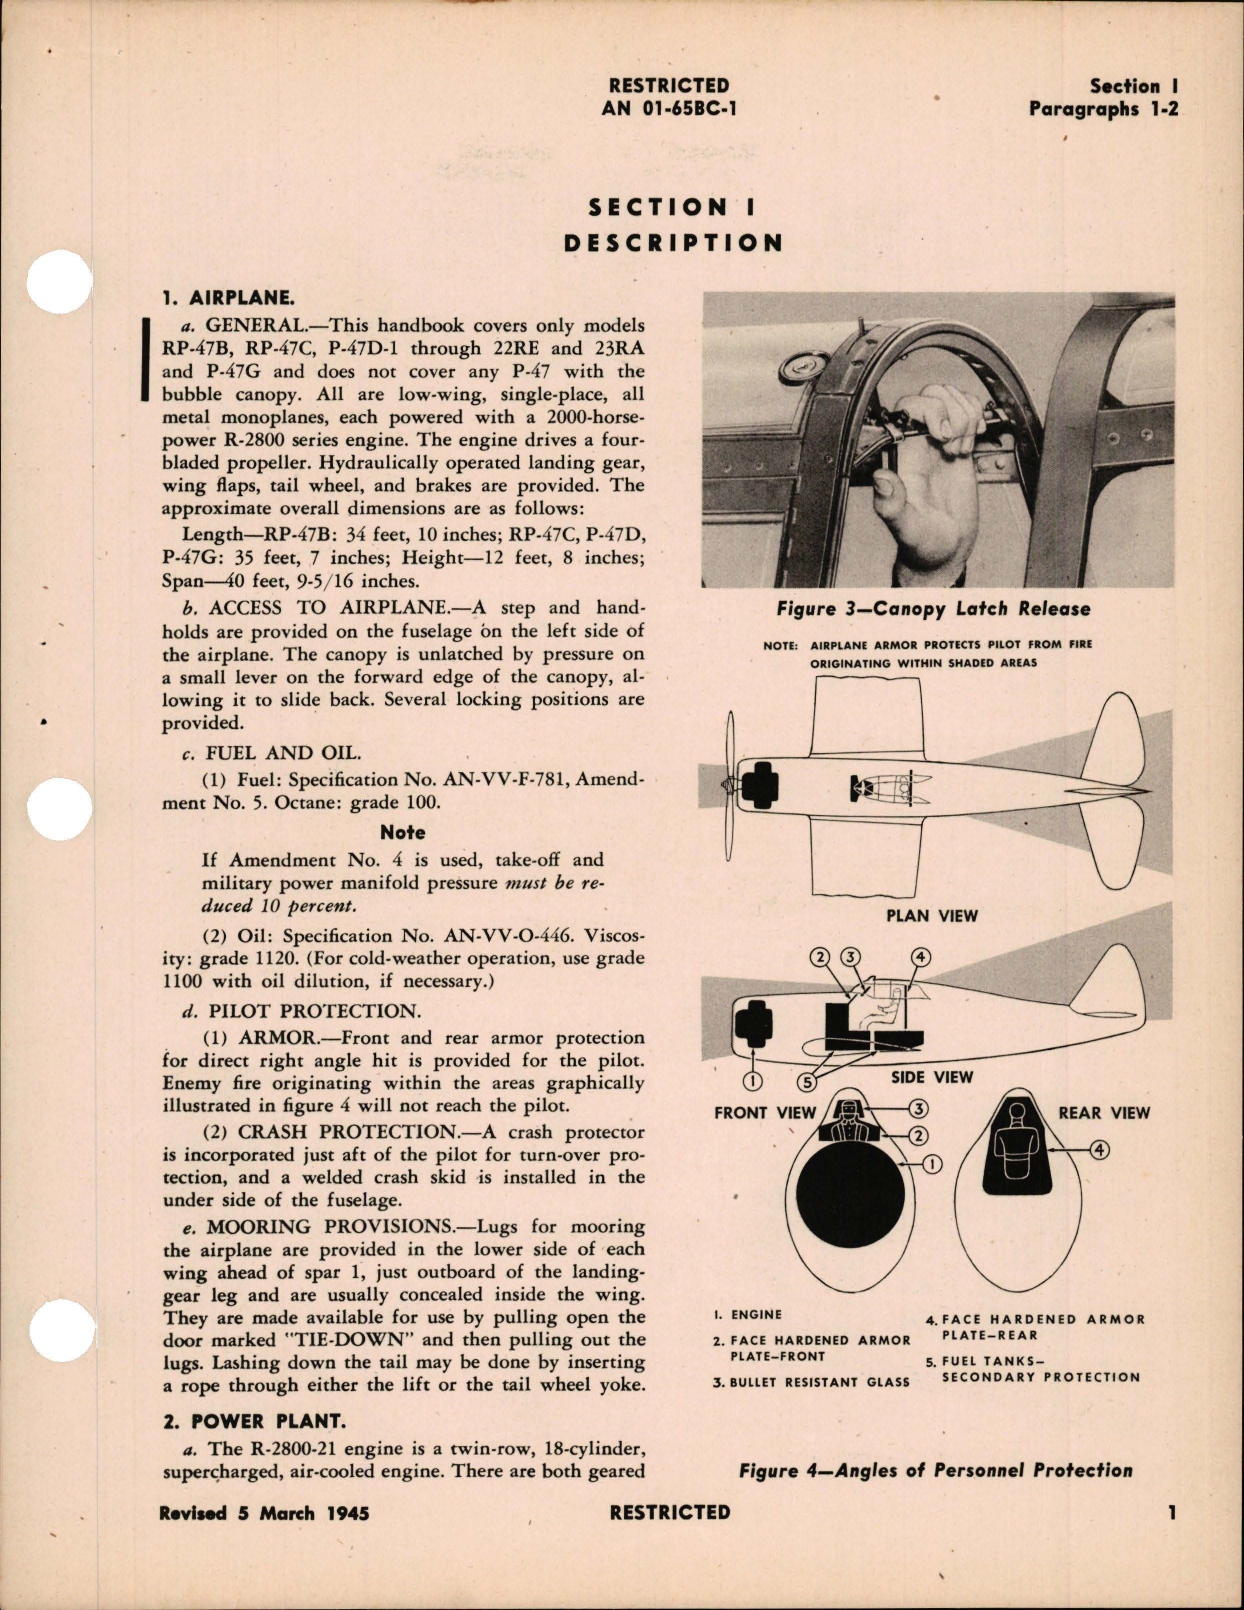 Sample page 5 from AirCorps Library document: Pilot's Flight Operating Instructions for RP-47B, RP-47C, P-47G, P-47D-1 through P-47-23